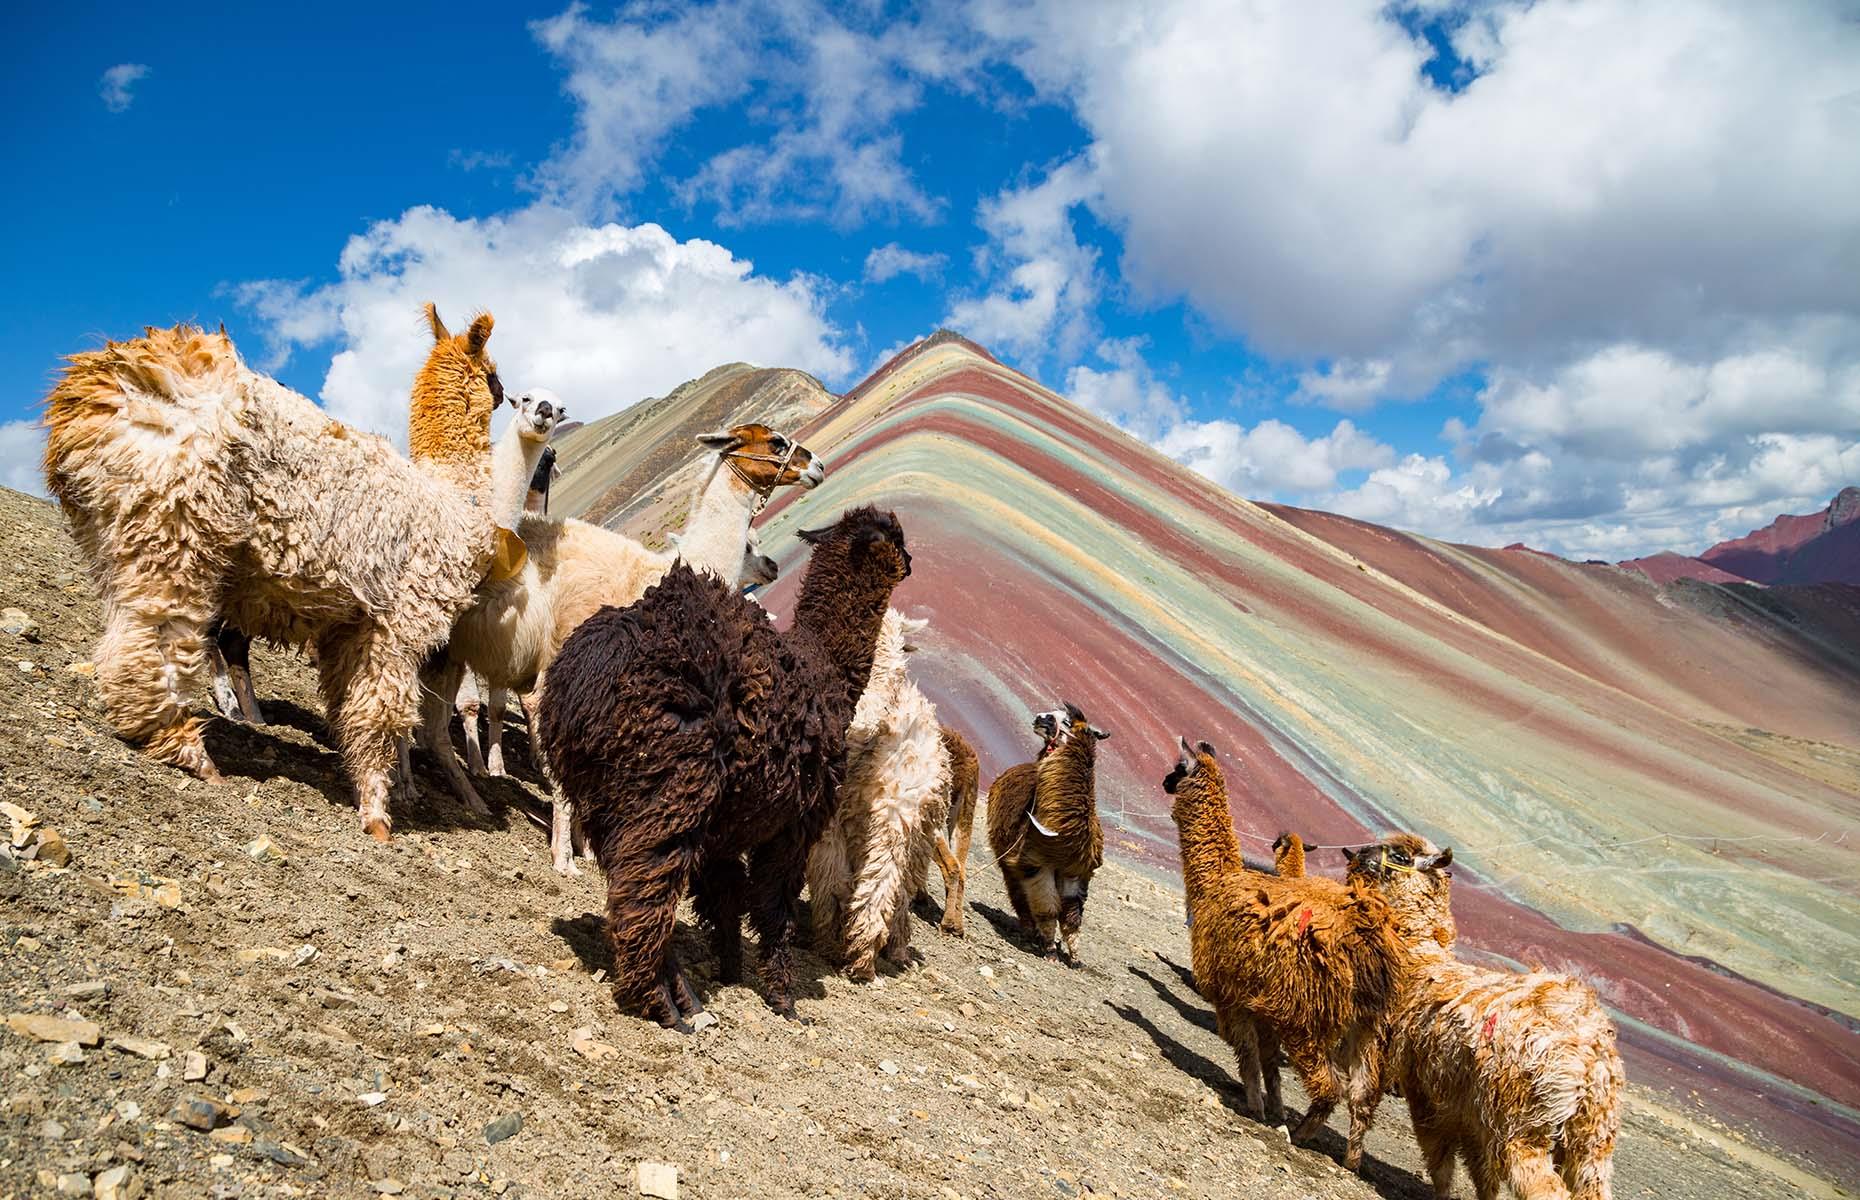 <p>You’ll see a number of South American icons on your way up: look out for llamas and alpacas roaming free. When you reach the summit, you’ll want to take endless selfies with the burst of color behind you. But look up from your screen to see other mountains in the Vilcanota range, as well as a high-altitude glacier known as Cusco Ausangate. </p>  <p><a href="https://www.loveexploring.com/gallerylist/95883/secrets-of-the-worlds-most-beautiful-mountains"><strong>Now take a look at the world's most beautiful mountains</strong></a></p>